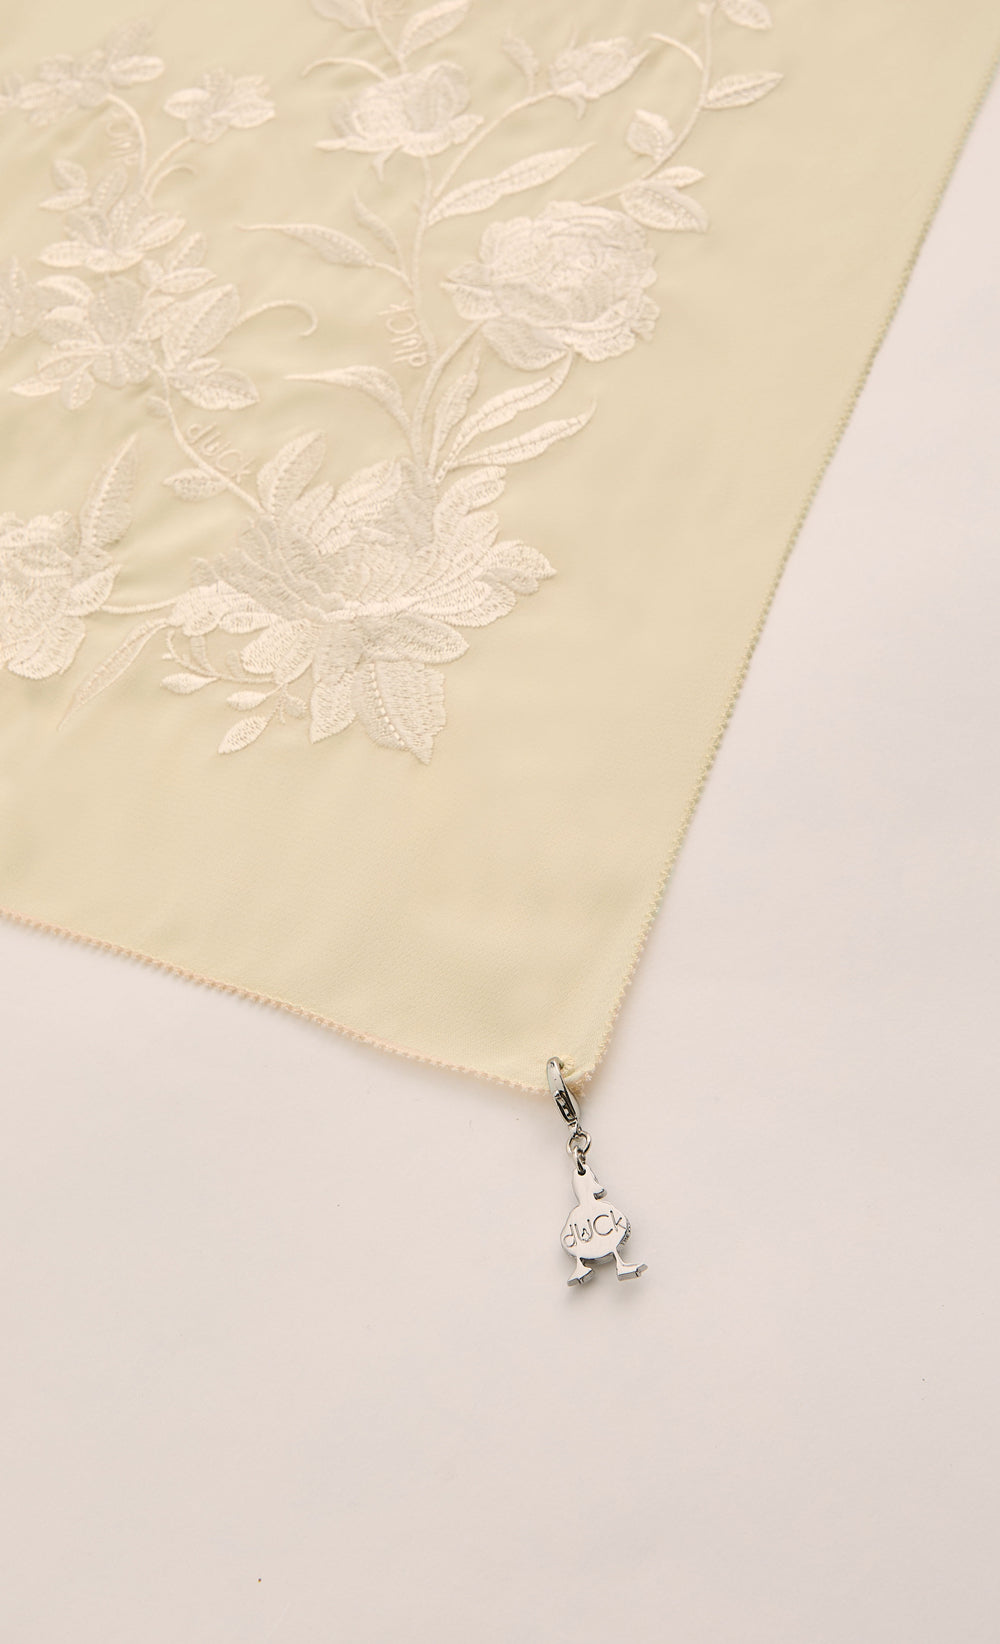 The Peonies Embroidery dUCk Square Scarf in Beige